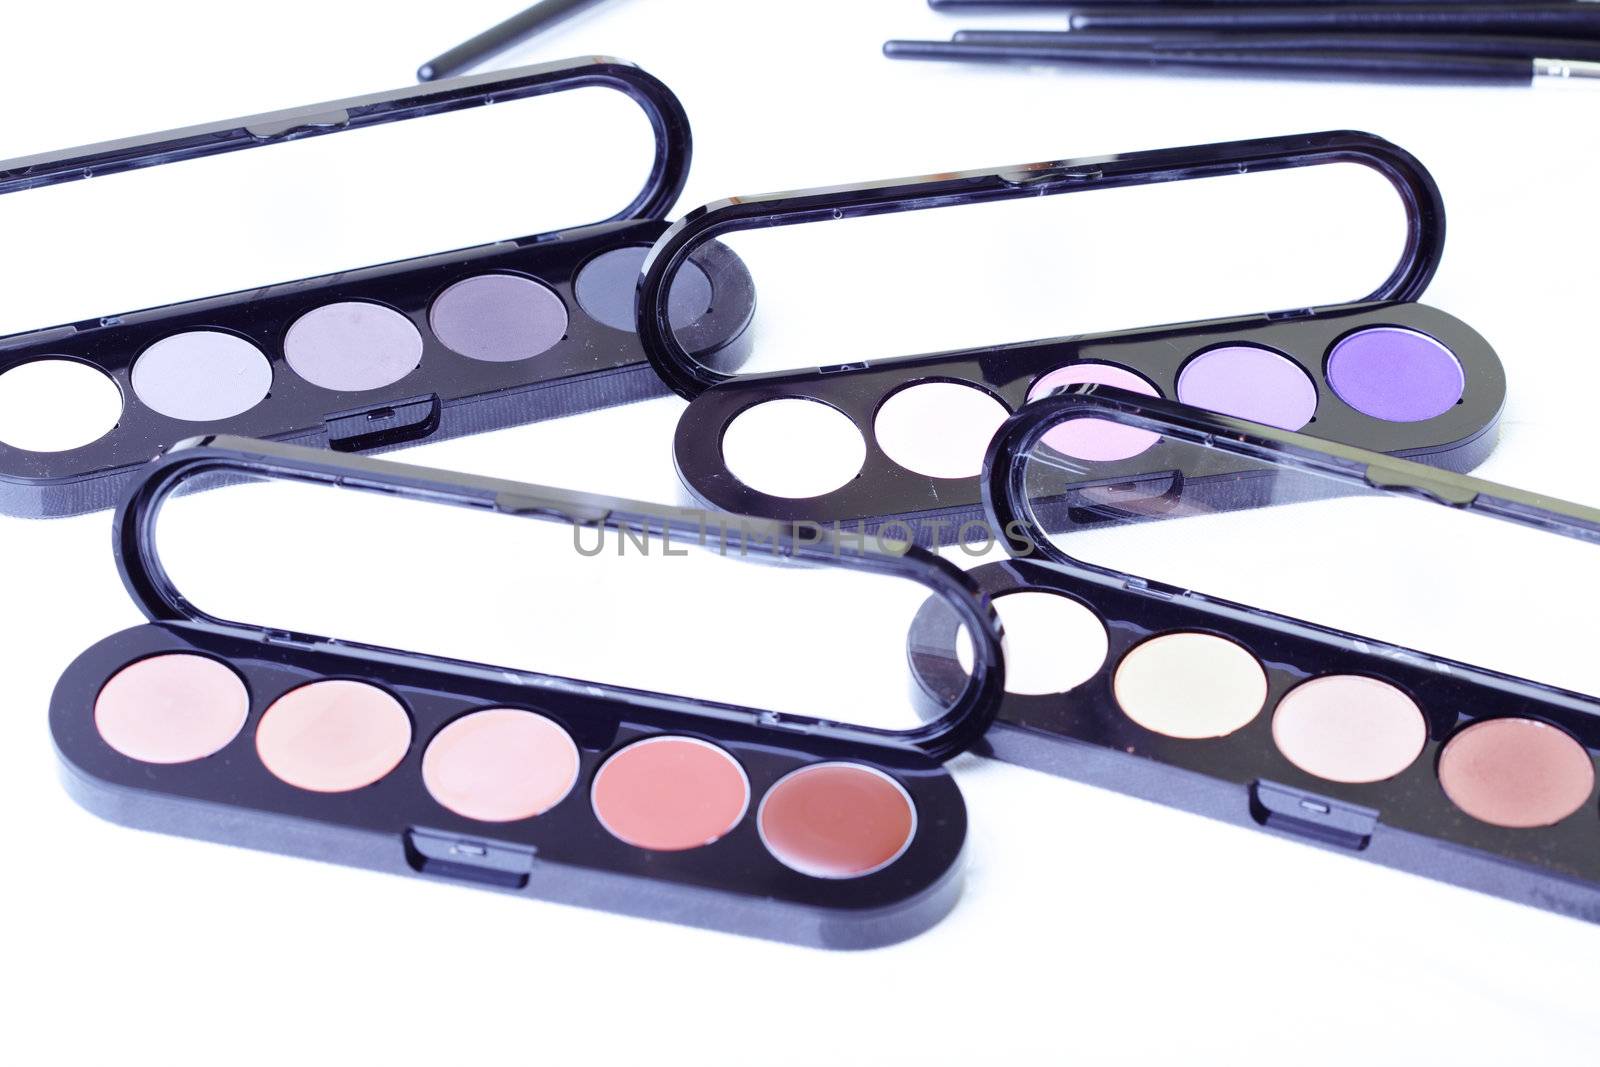 Close-up photo of the makeup set on textured white background